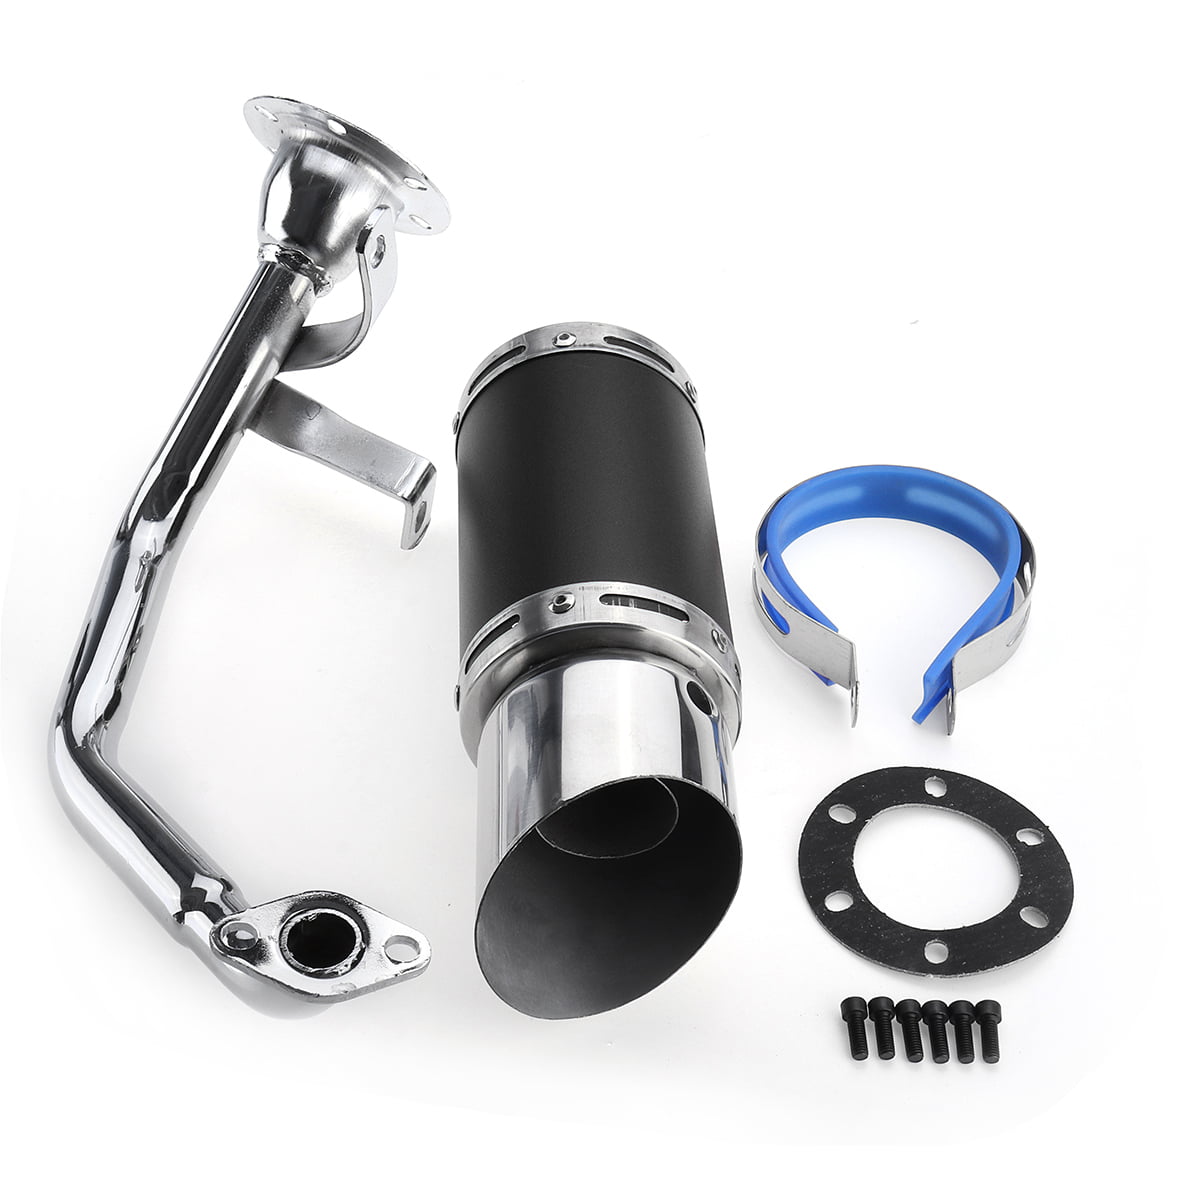 Black Perfomance Racing Exhaust Muffler Pipe GY6 125cc 150cc Scooter Moped New 